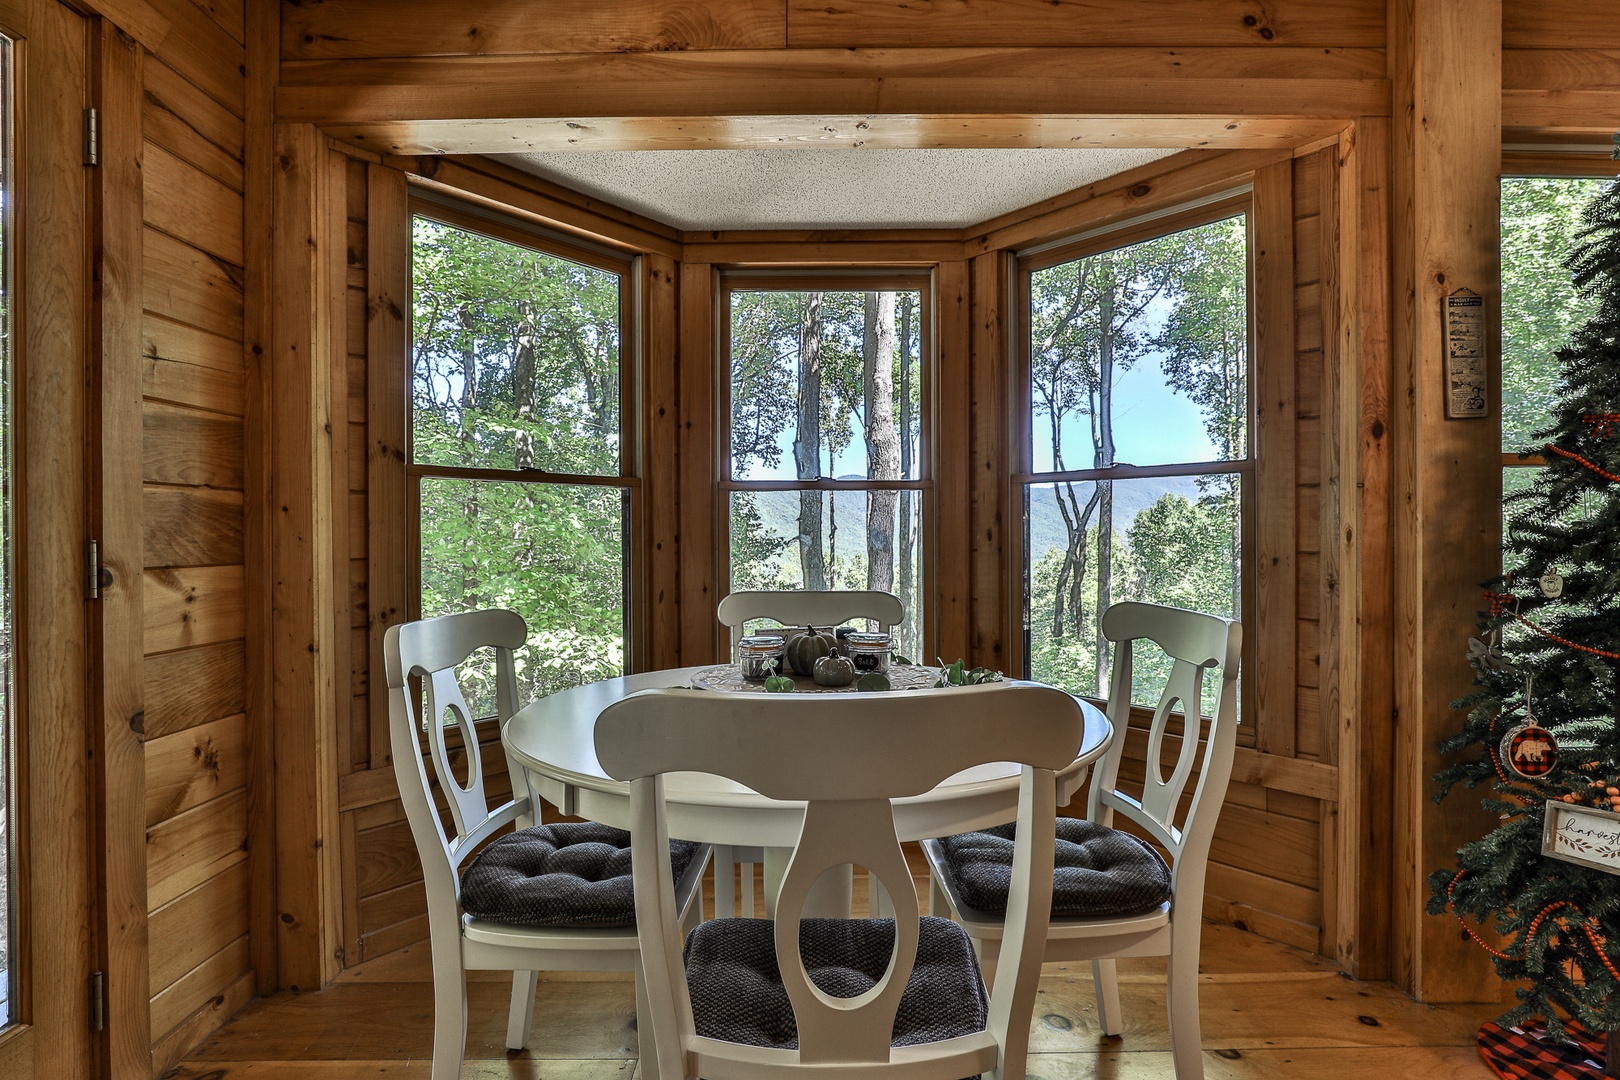 4 Seasons Porch - Dine with a specatacular view!